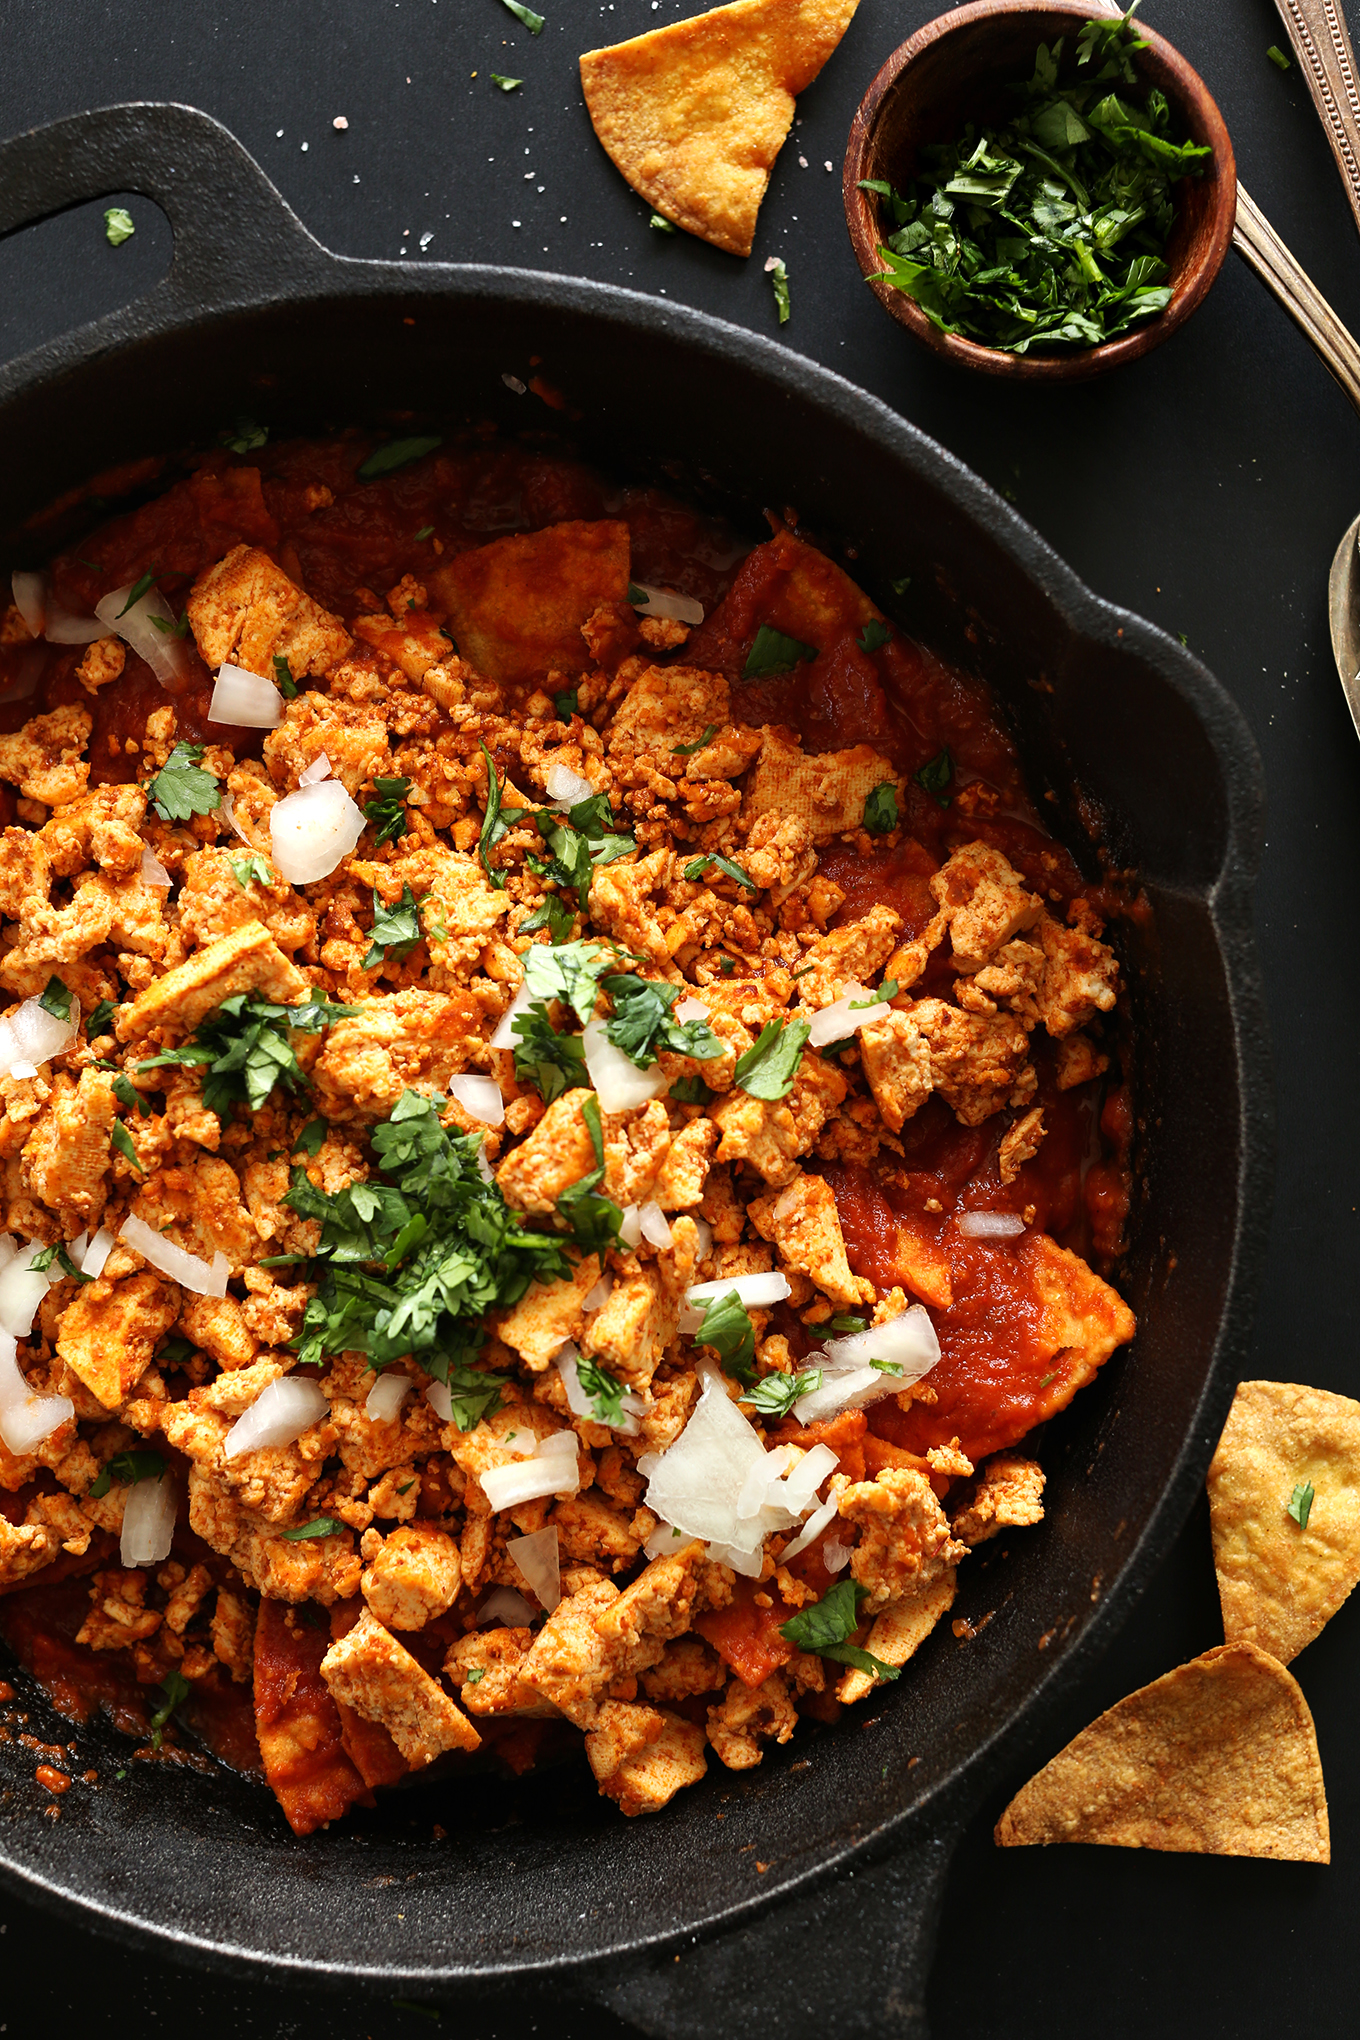 Cast-iron skillet filled with our Tofu Chilaquiles recipe